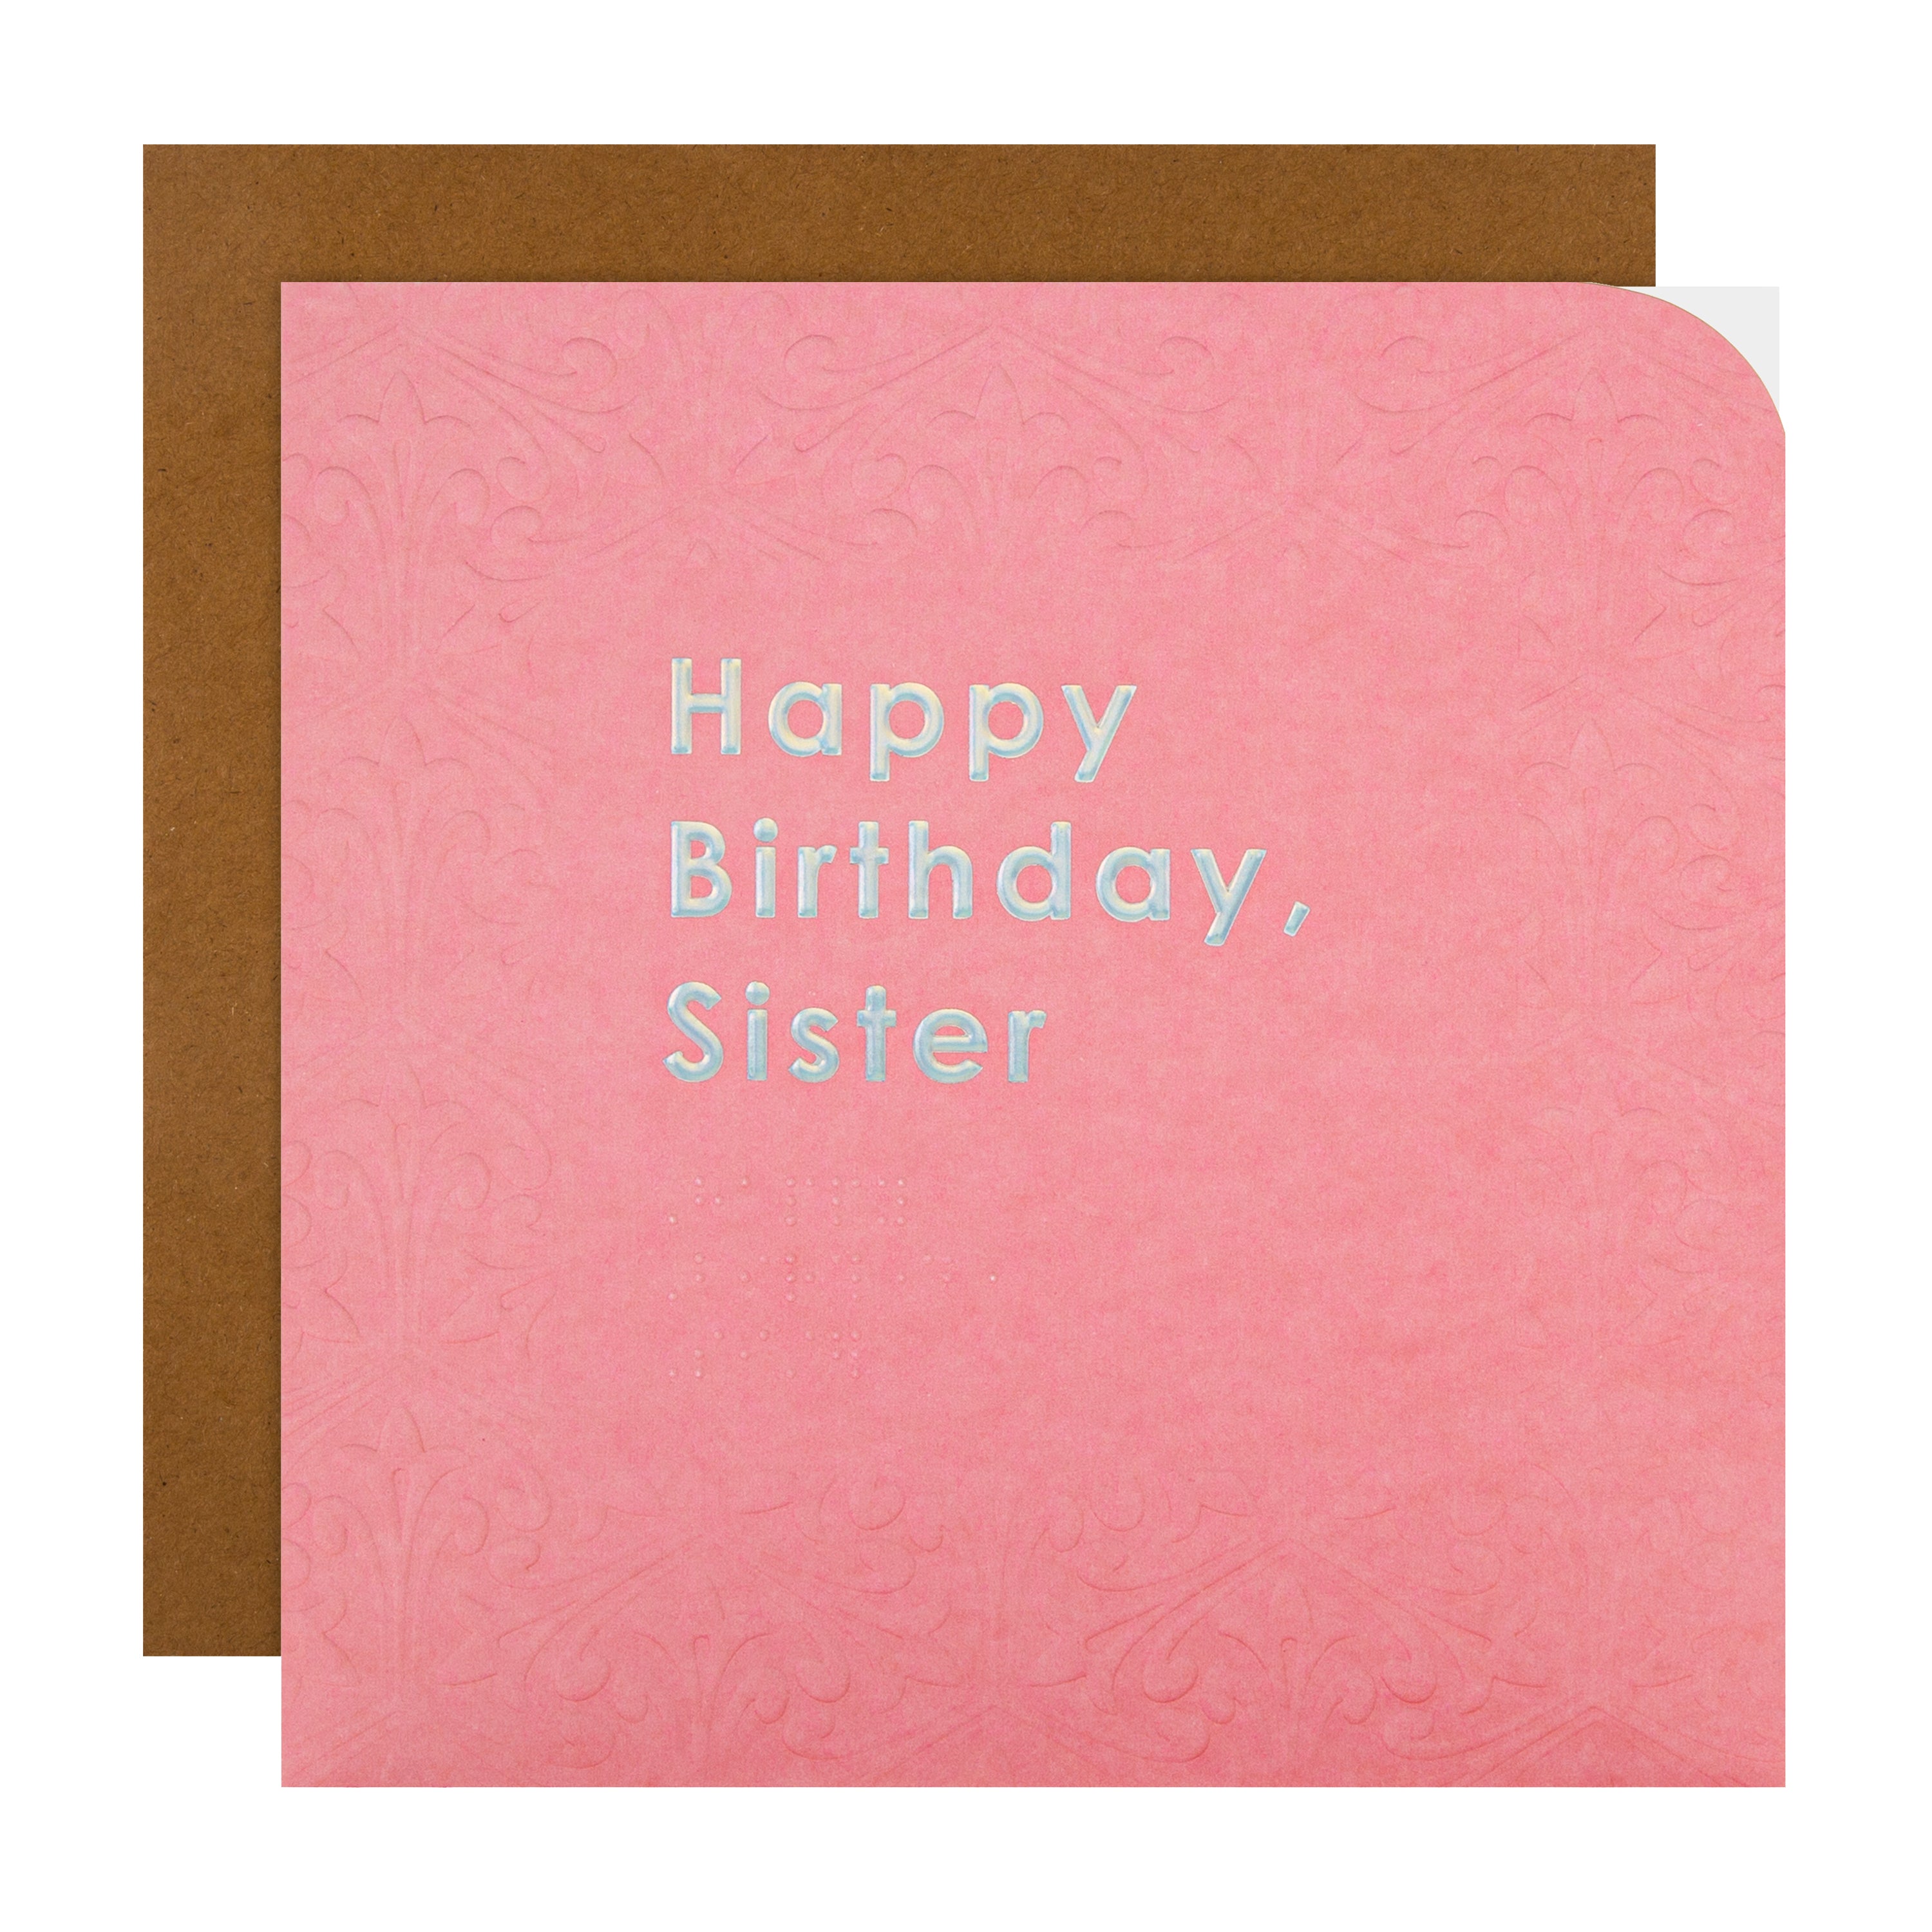 Birthday Card for Sister - Contemporary Patterned Braille Design